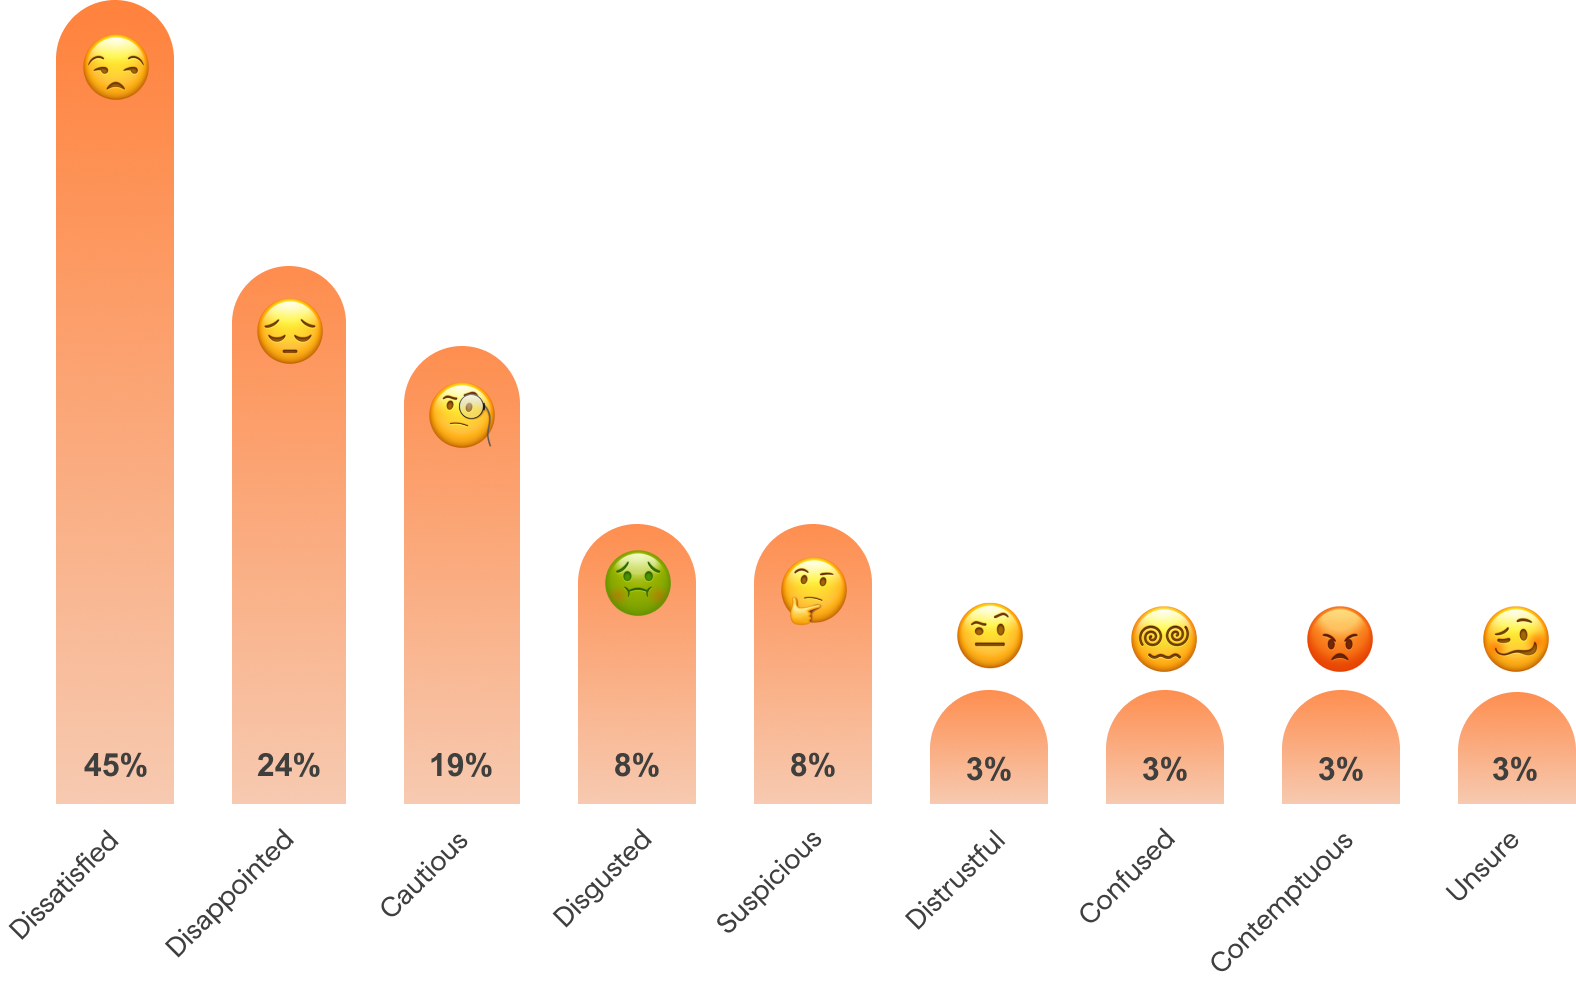 a bar graph with the values being different negative emotions and emojis, with percentages of hiring managers' responses on how they feel about traditional recruiting